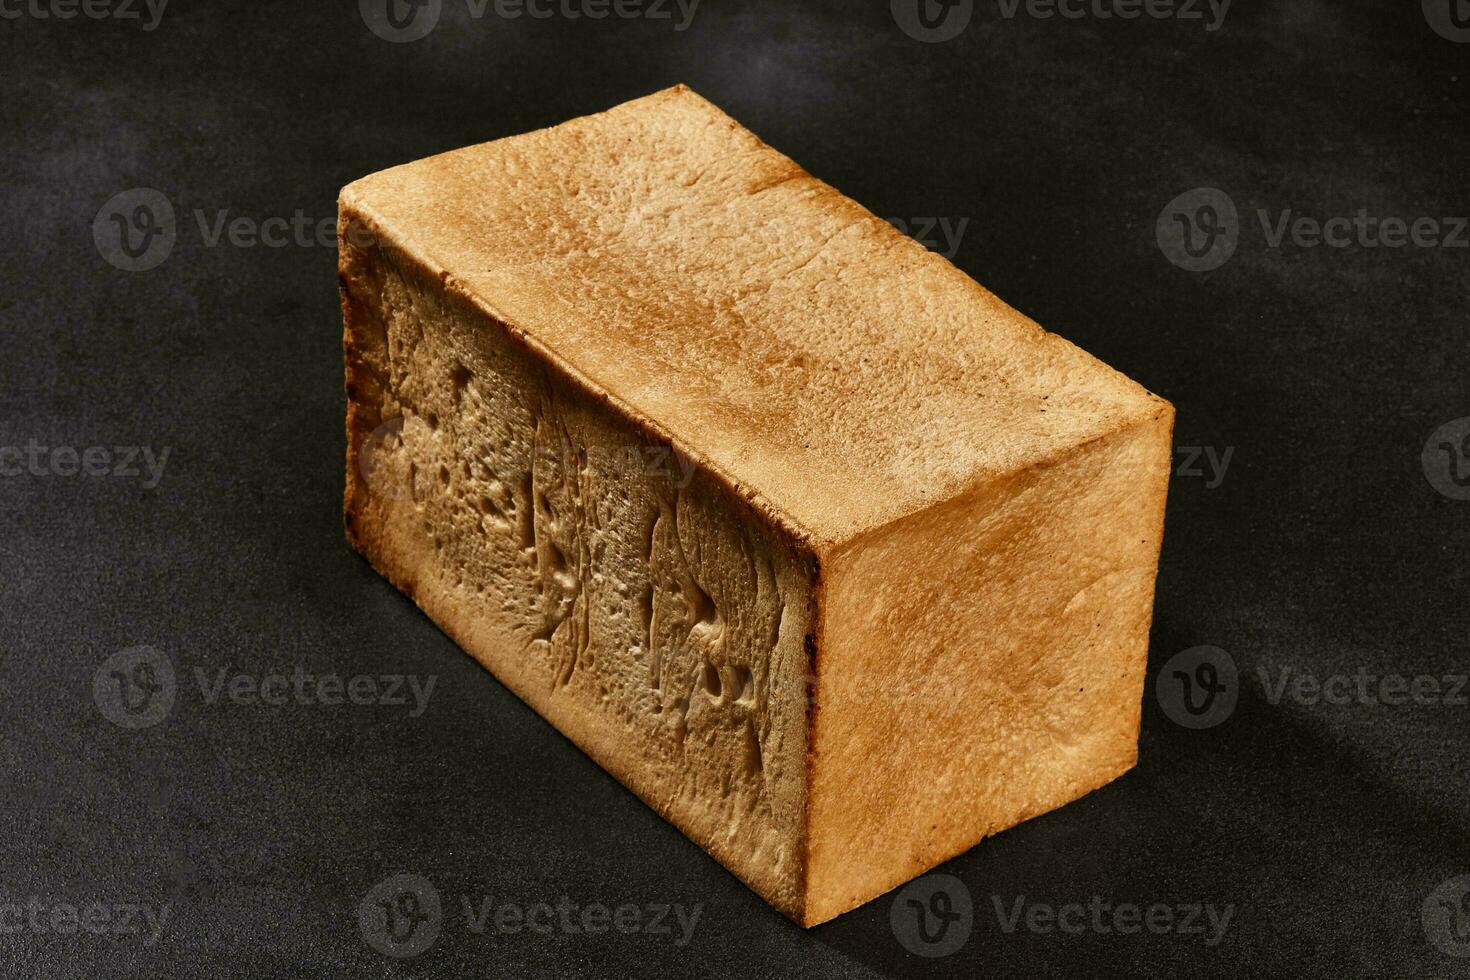 Whole loaf of fresh, delicious baked white bread against black background with copy space. Close-up photo